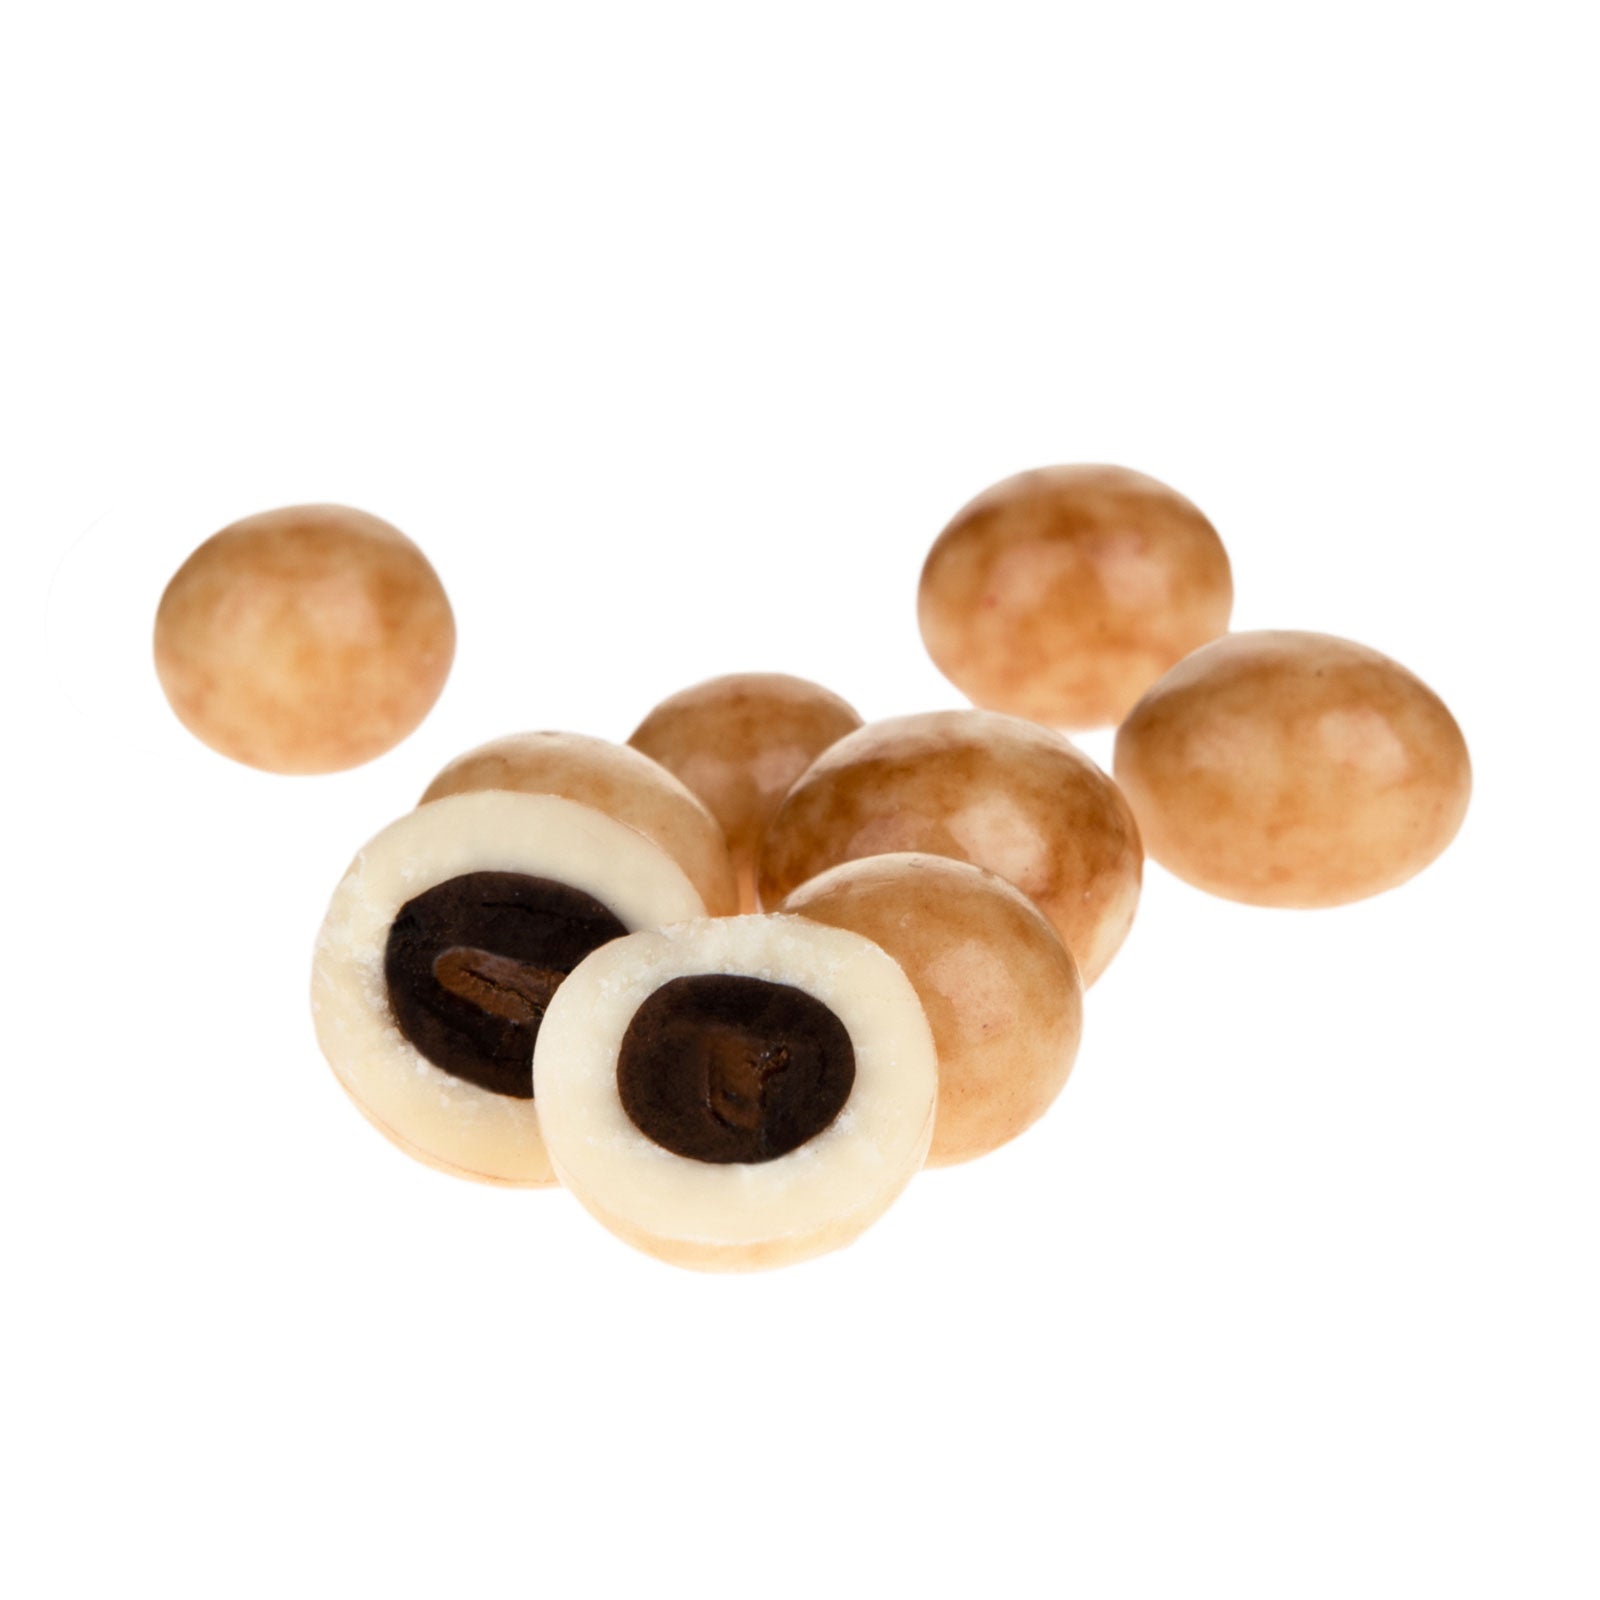 White Chocolate Covered Cappuccino Coffee Beans